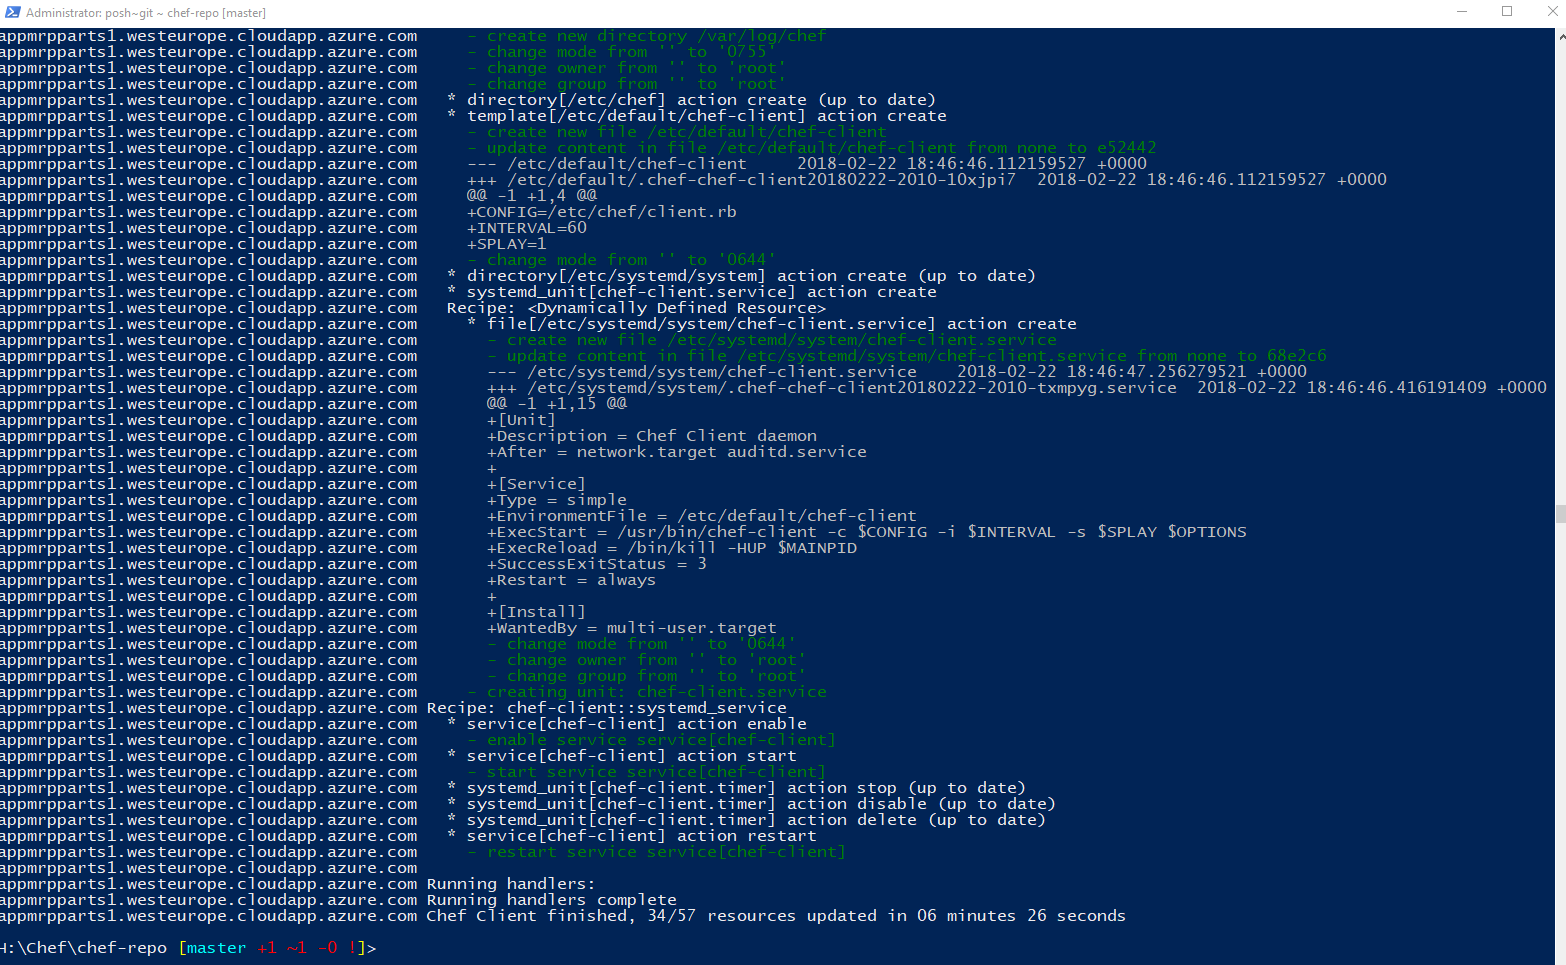 Screenshot of a PowerShell window. The knife bootstrap command has run successfully. The knife command and its output are shown to illustrate how to run the bootstrap command in PowerShell.